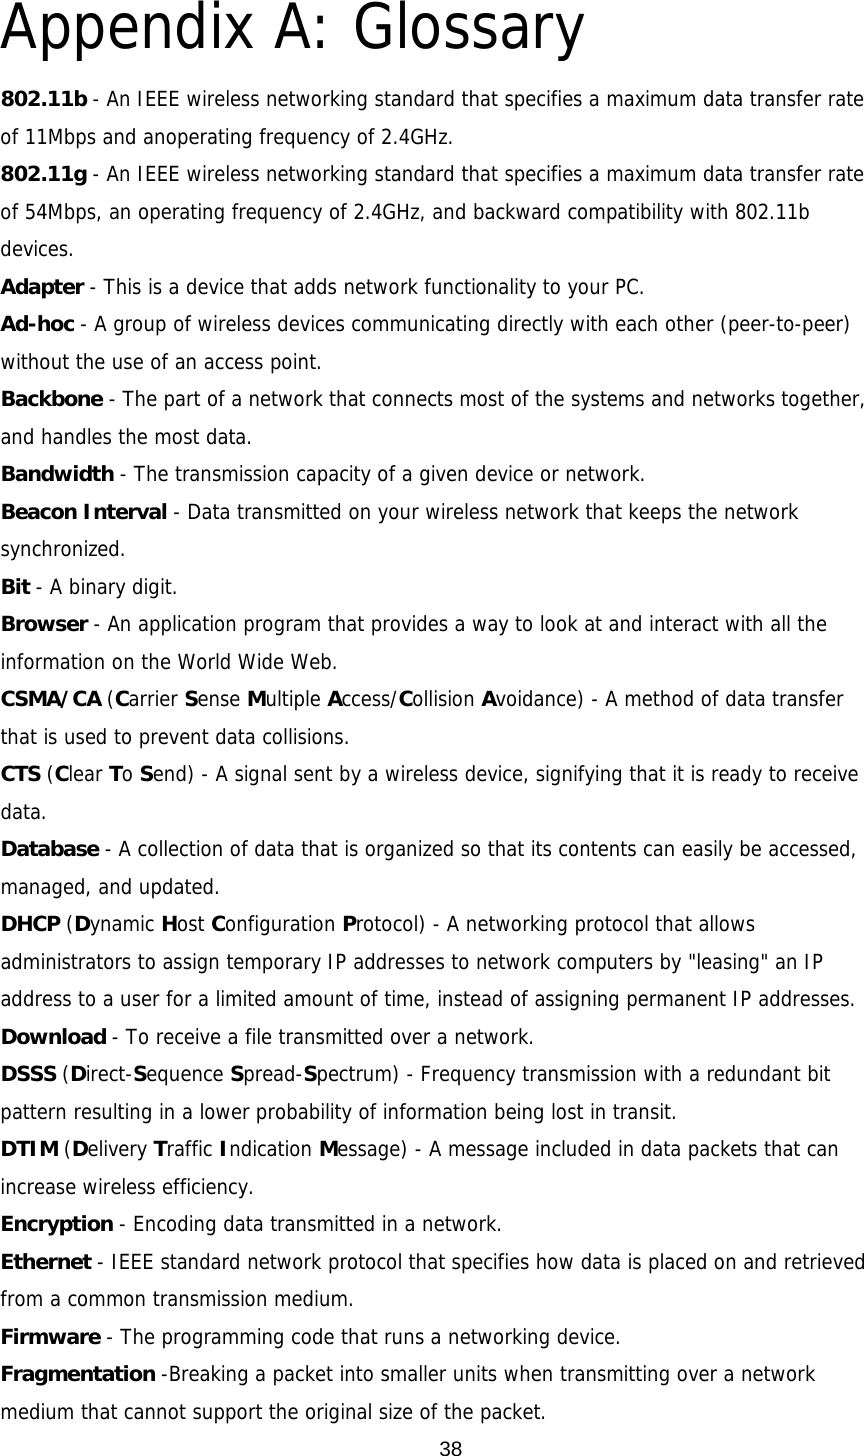  38Appendix A: Glossary 802.11b - An IEEE wireless networking standard that specifies a maximum data transfer rate of 11Mbps and anoperating frequency of 2.4GHz. 802.11g - An IEEE wireless networking standard that specifies a maximum data transfer rate of 54Mbps, an operating frequency of 2.4GHz, and backward compatibility with 802.11b devices. Adapter - This is a device that adds network functionality to your PC. Ad-hoc - A group of wireless devices communicating directly with each other (peer-to-peer) without the use of an access point. Backbone - The part of a network that connects most of the systems and networks together, and handles the most data. Bandwidth - The transmission capacity of a given device or network. Beacon Interval - Data transmitted on your wireless network that keeps the network synchronized. Bit - A binary digit. Browser - An application program that provides a way to look at and interact with all the information on the World Wide Web. CSMA/CA (Carrier Sense Multiple Access/Collision Avoidance) - A method of data transfer that is used to prevent data collisions. CTS (Clear To Send) - A signal sent by a wireless device, signifying that it is ready to receive data. Database - A collection of data that is organized so that its contents can easily be accessed, managed, and updated. DHCP (Dynamic Host Configuration Protocol) - A networking protocol that allows administrators to assign temporary IP addresses to network computers by &quot;leasing&quot; an IP address to a user for a limited amount of time, instead of assigning permanent IP addresses. Download - To receive a file transmitted over a network. DSSS (Direct-Sequence Spread-Spectrum) - Frequency transmission with a redundant bit pattern resulting in a lower probability of information being lost in transit. DTIM (Delivery Traffic Indication Message) - A message included in data packets that can increase wireless efficiency. Encryption - Encoding data transmitted in a network. Ethernet - IEEE standard network protocol that specifies how data is placed on and retrieved from a common transmission medium. Firmware - The programming code that runs a networking device. Fragmentation -Breaking a packet into smaller units when transmitting over a network medium that cannot support the original size of the packet. 